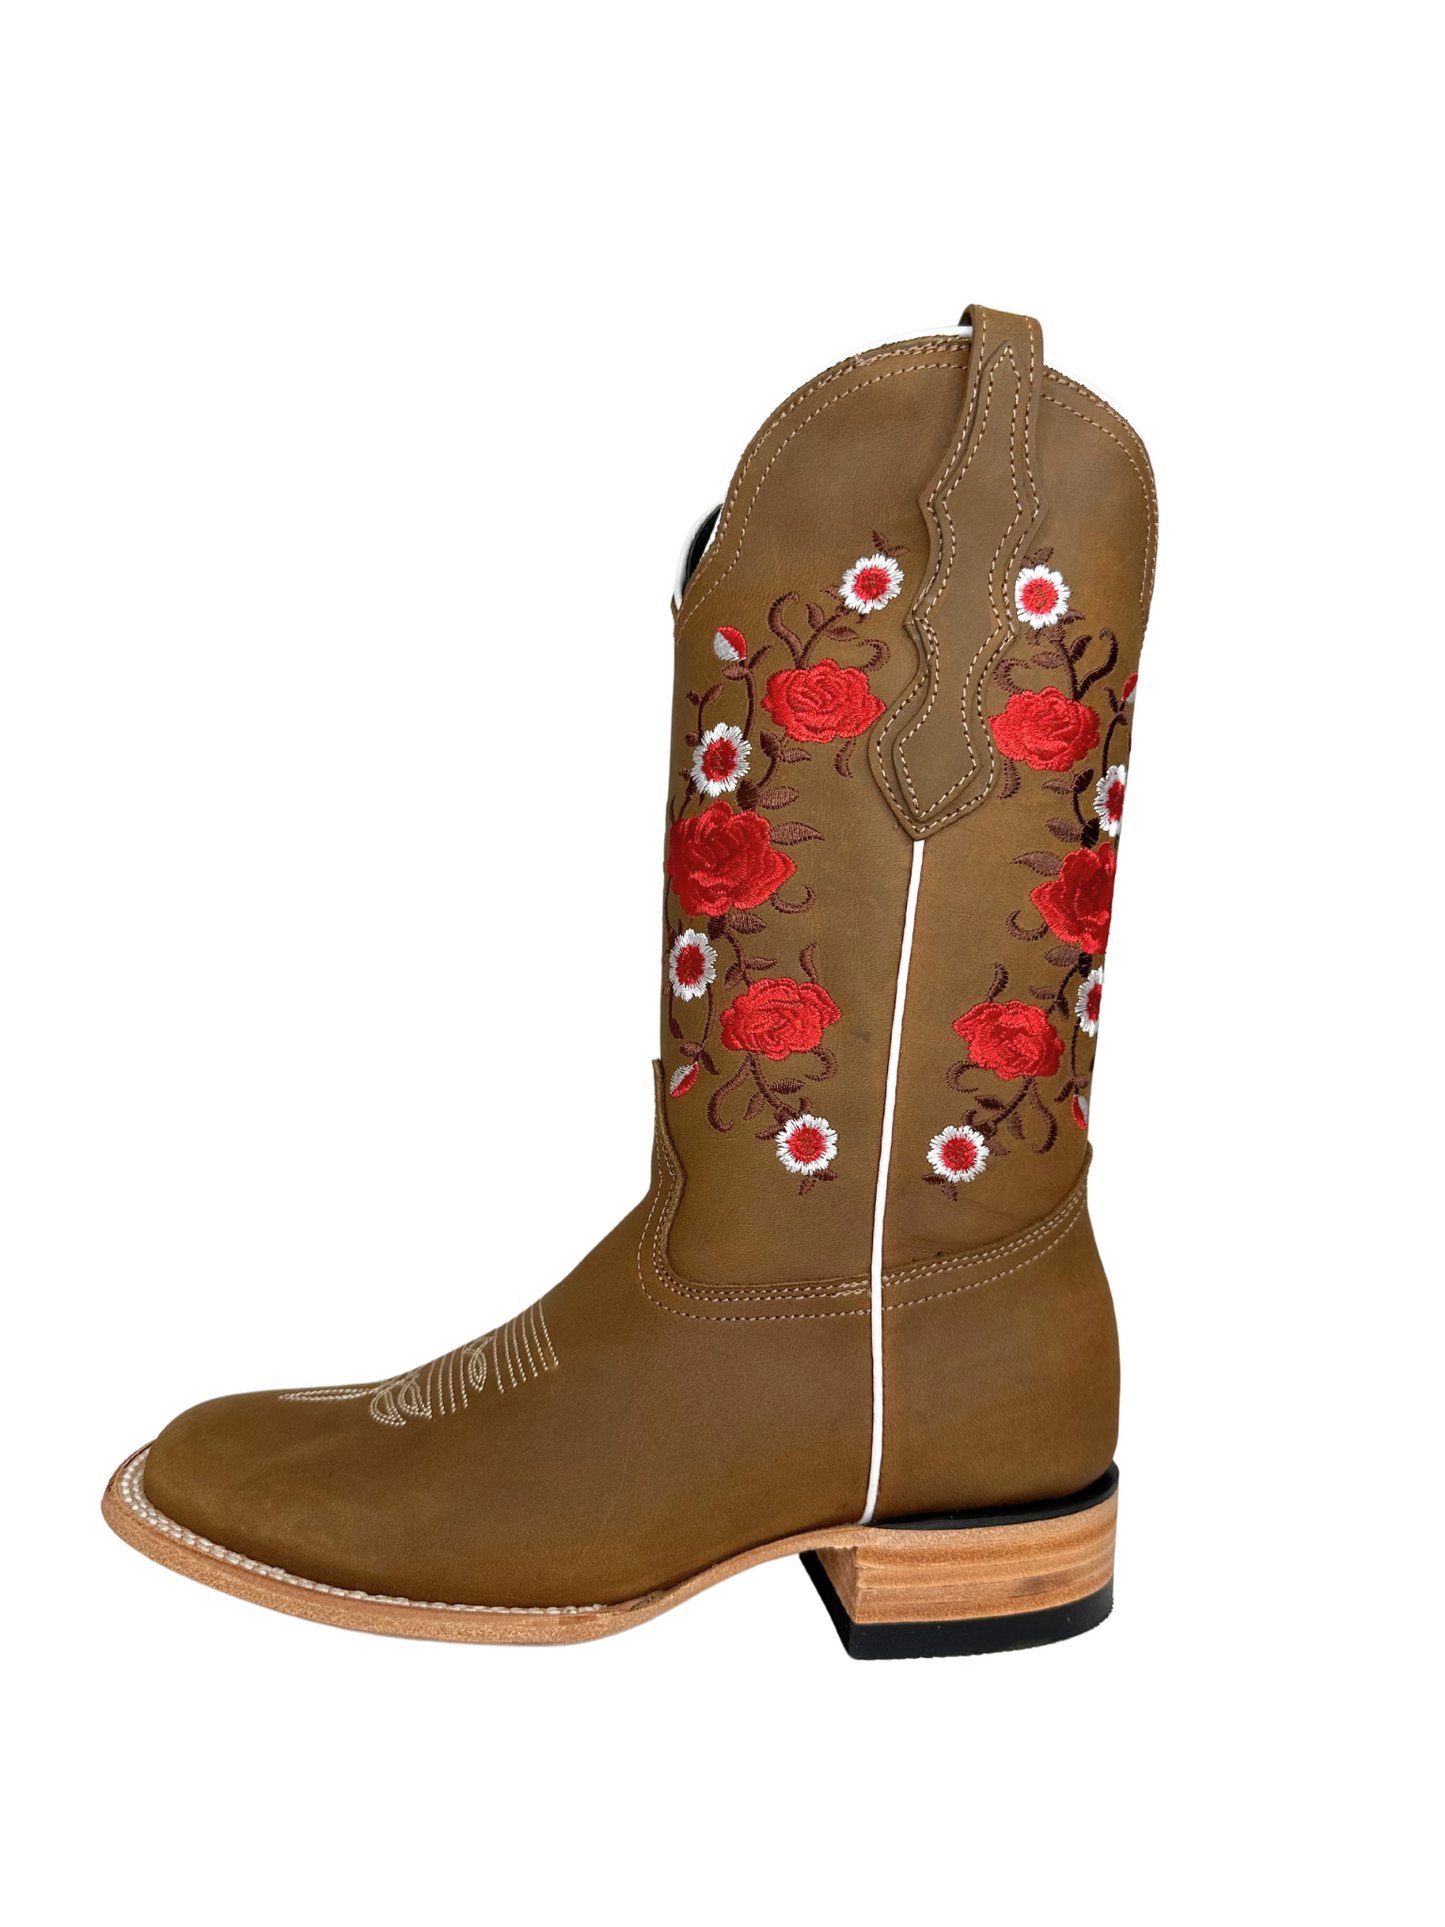 White Diamond Women's Red Floral Square Toe Leather Boot